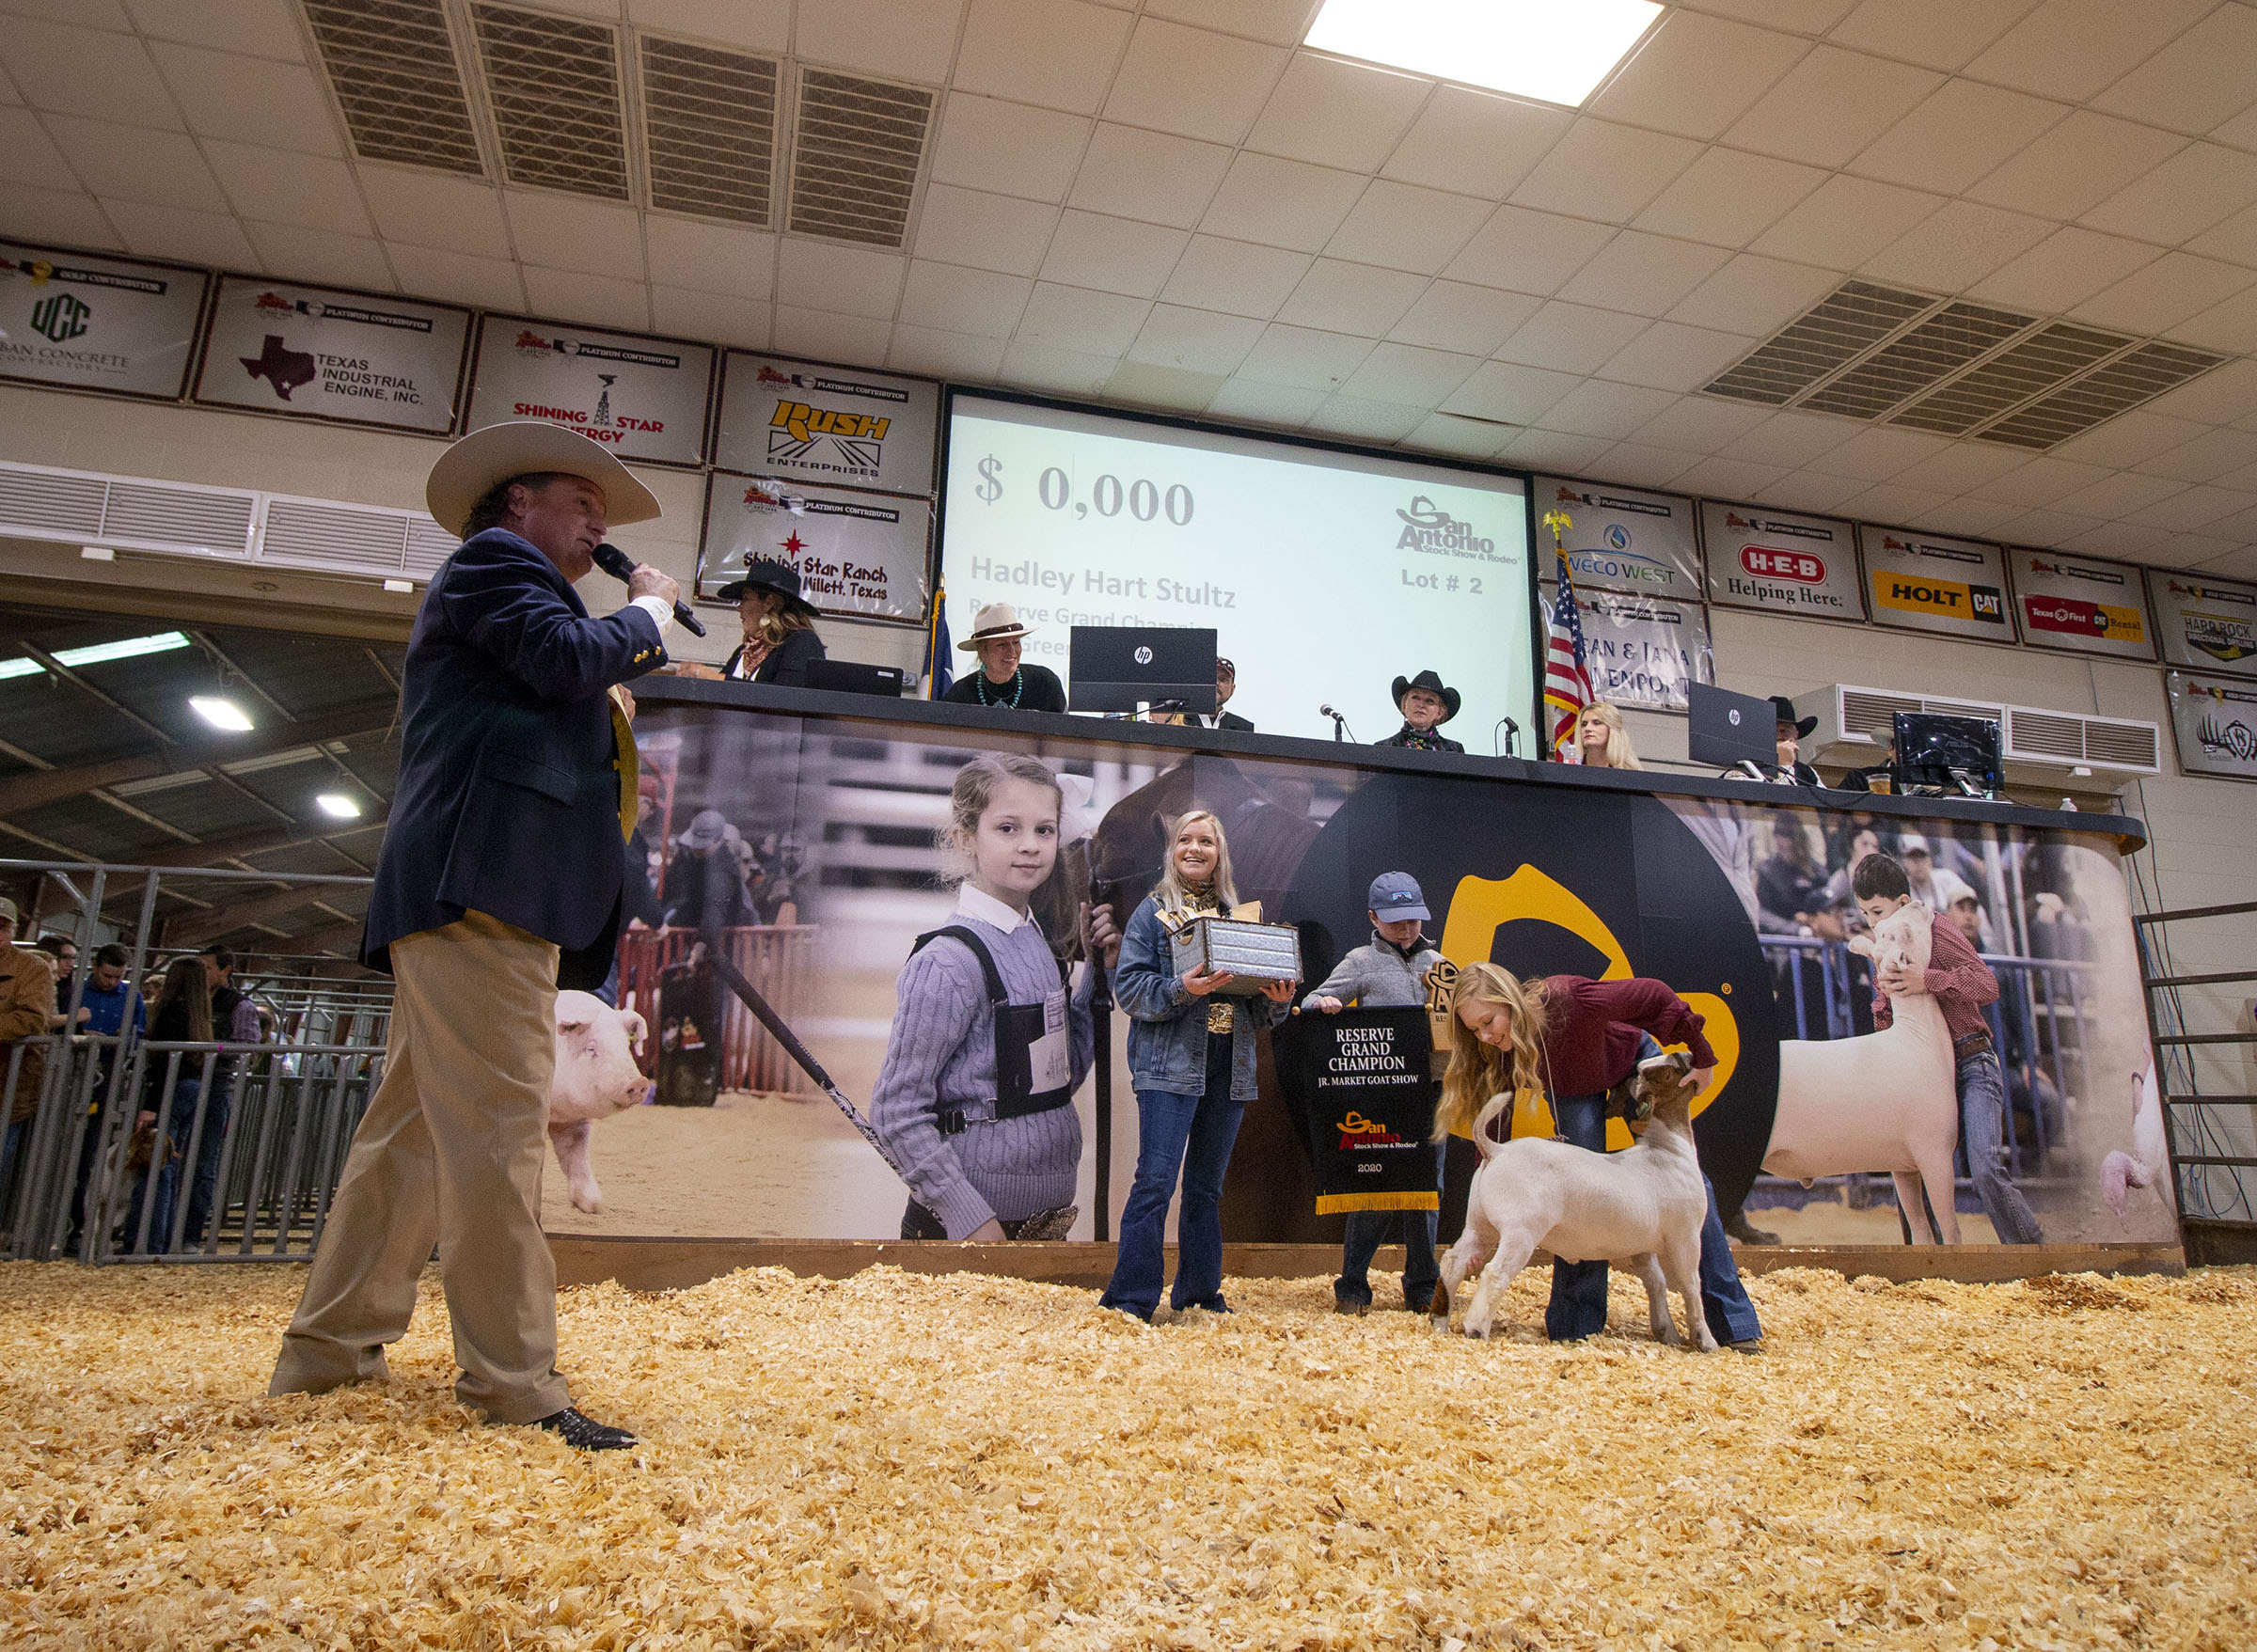 Auctioneer C. Jason Spence calls a goat auction at the San Antonio Livestock Show, with kids in the background. Photo courtesy of San Antonio Stock Show and Rodeo.